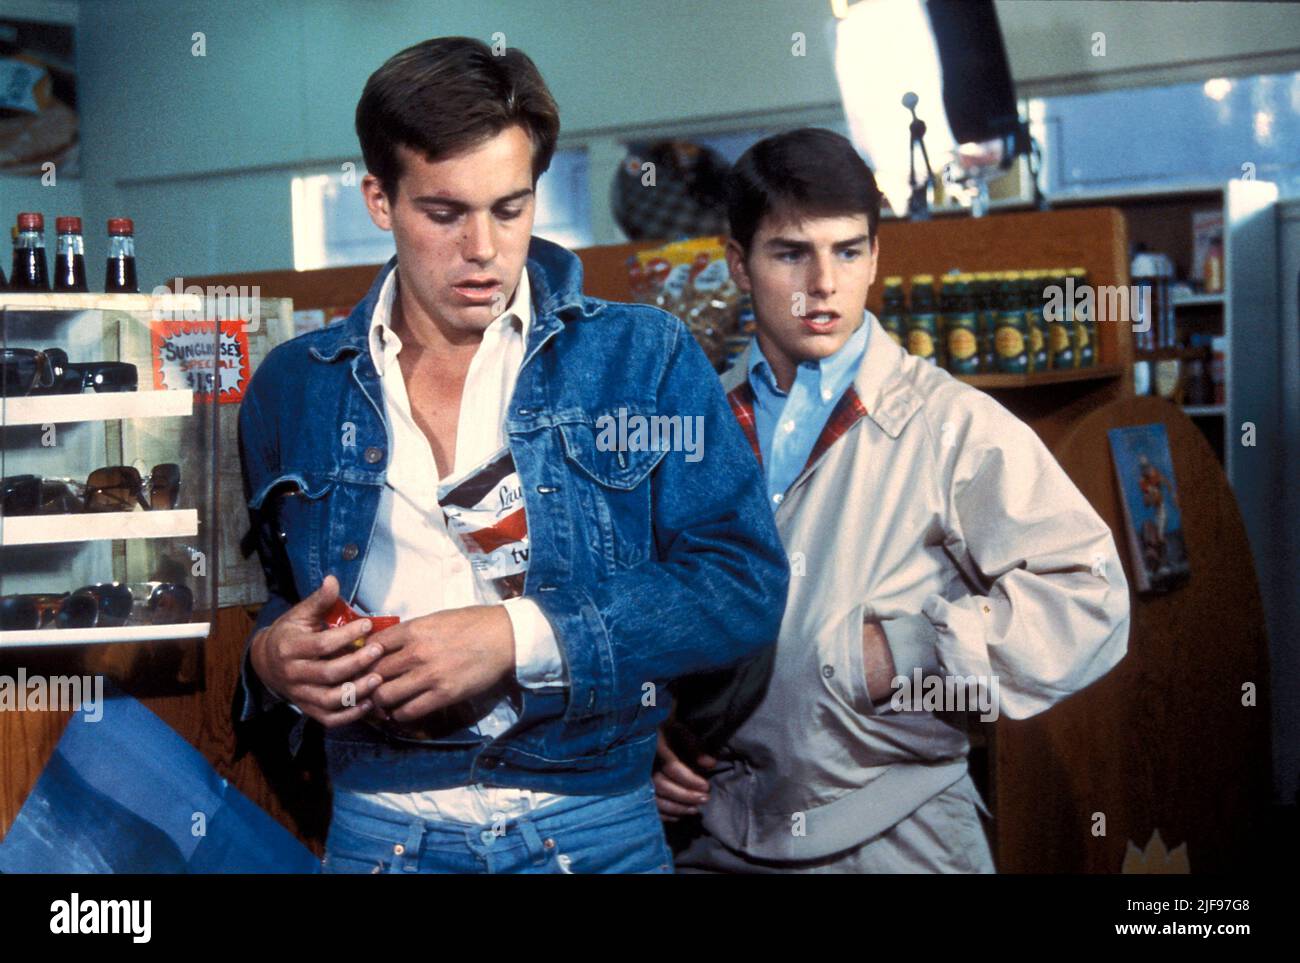 TOM CRUISE and JOHN STOCKWELL in LOSIN' IT (1983), directed by CURTIS HANSON. Credit: Tiberius Productions / Album Stock Photo